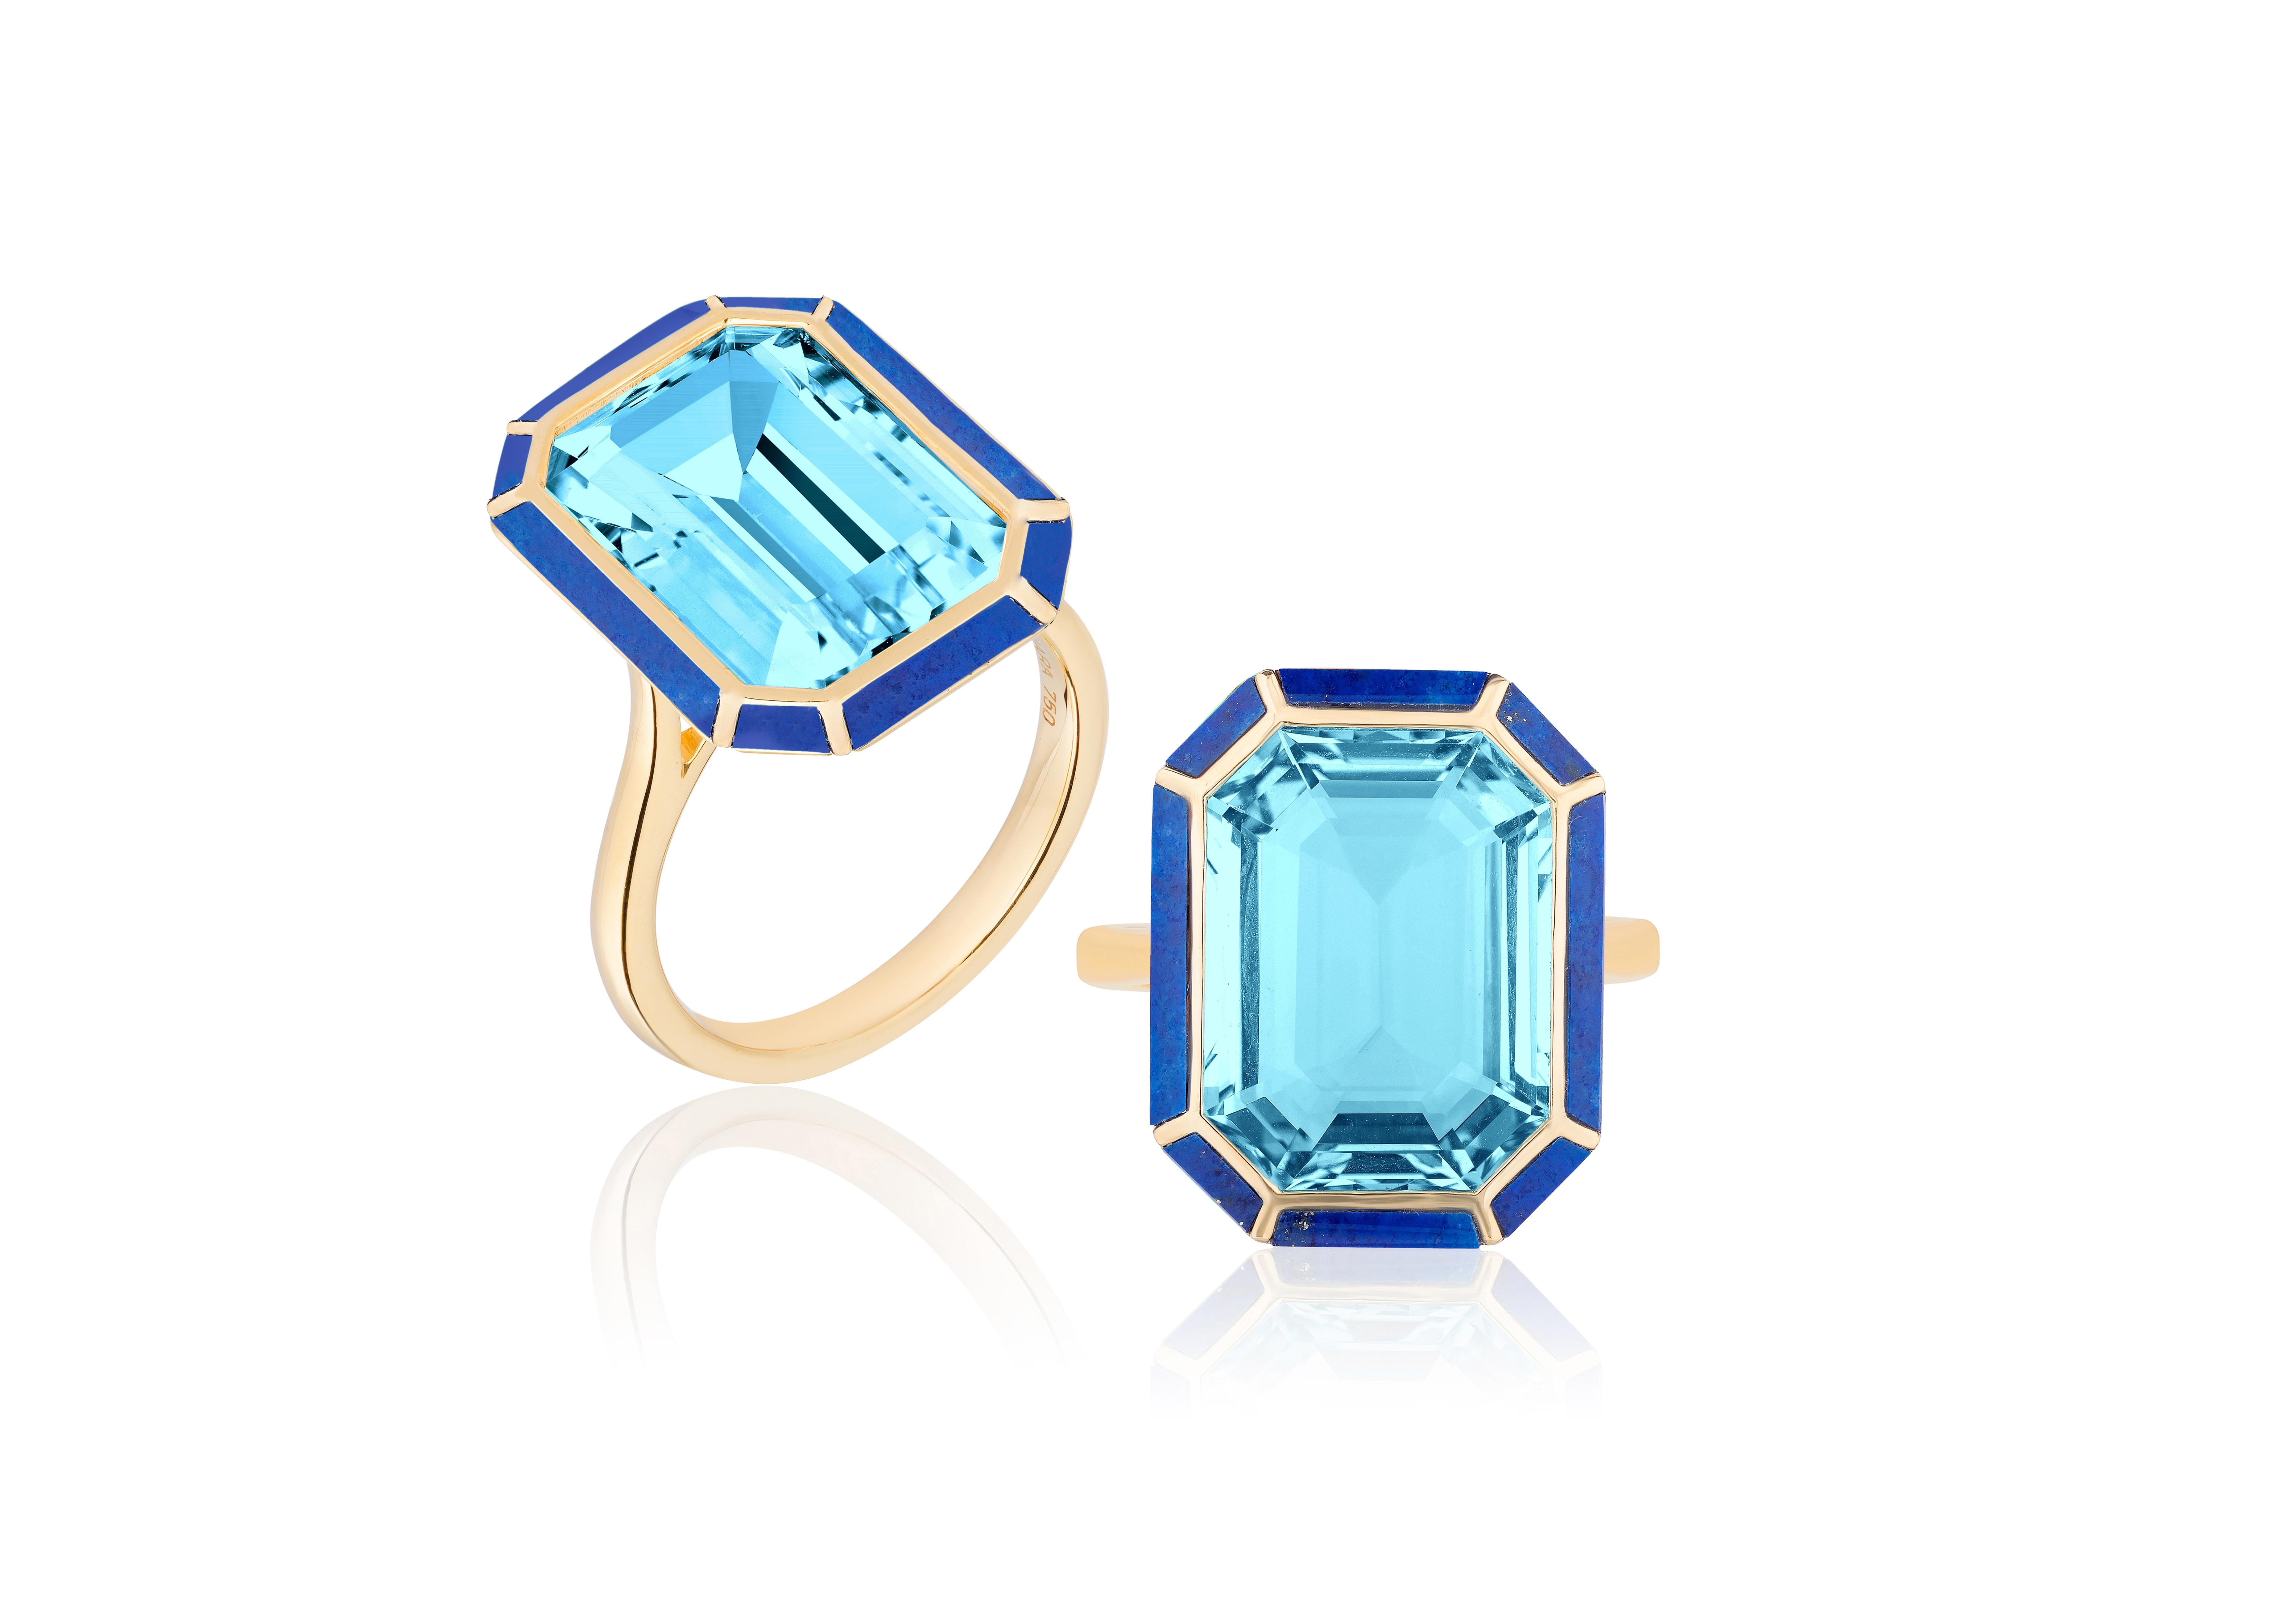 Blue Topaz and Lapis Emerald Cut Ring in 18K Yellow Gold, from 'Mélange' Collection.

Beautifully crafted, these special pieces from Goshwara are not to be missed!

* Gemstone: 100% Earth Mined 
* Approx. gemstone Weight: 20.93 Carats (Blue Topaz);